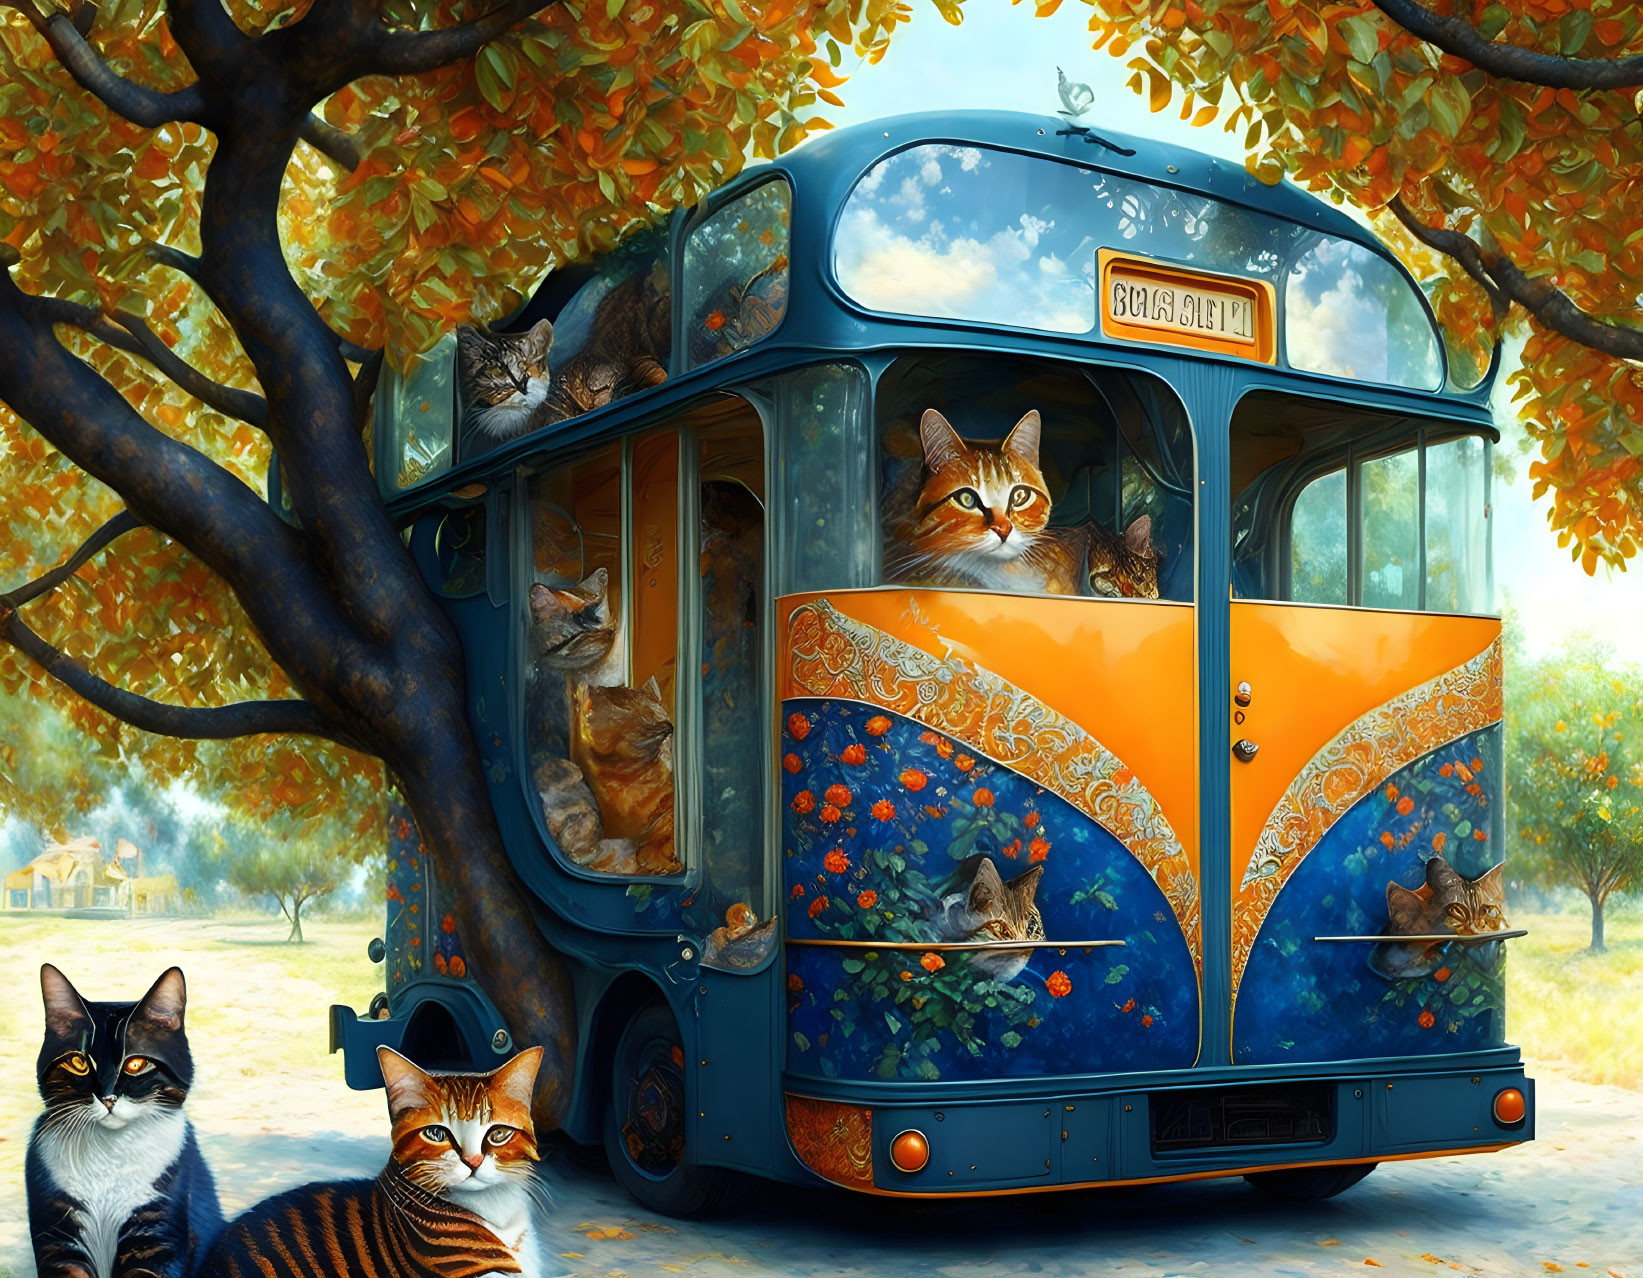 Whimsical painting of cats on vintage-style bus with floral designs